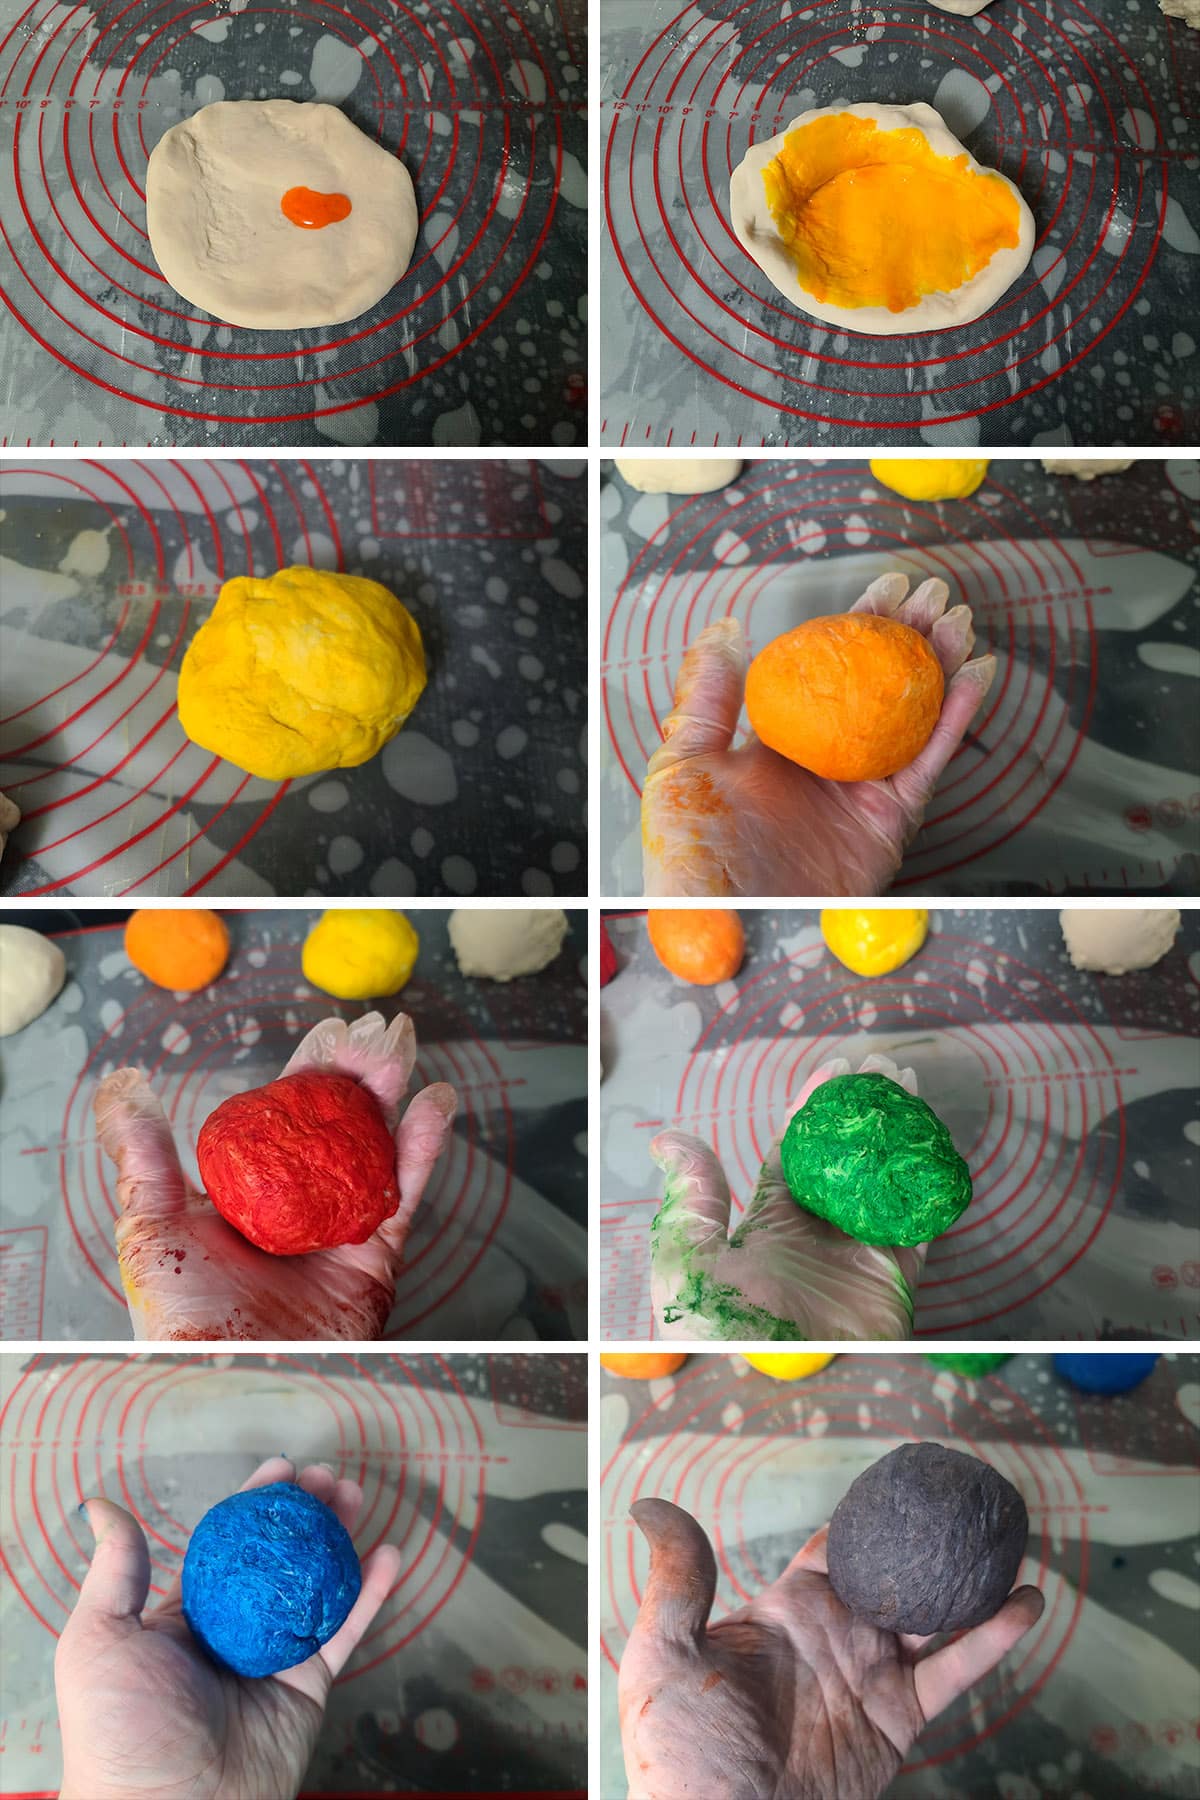 An 8 part image showing food coloring being used to dye the dough pieces red, orange, yellow, green, blue, and purple.